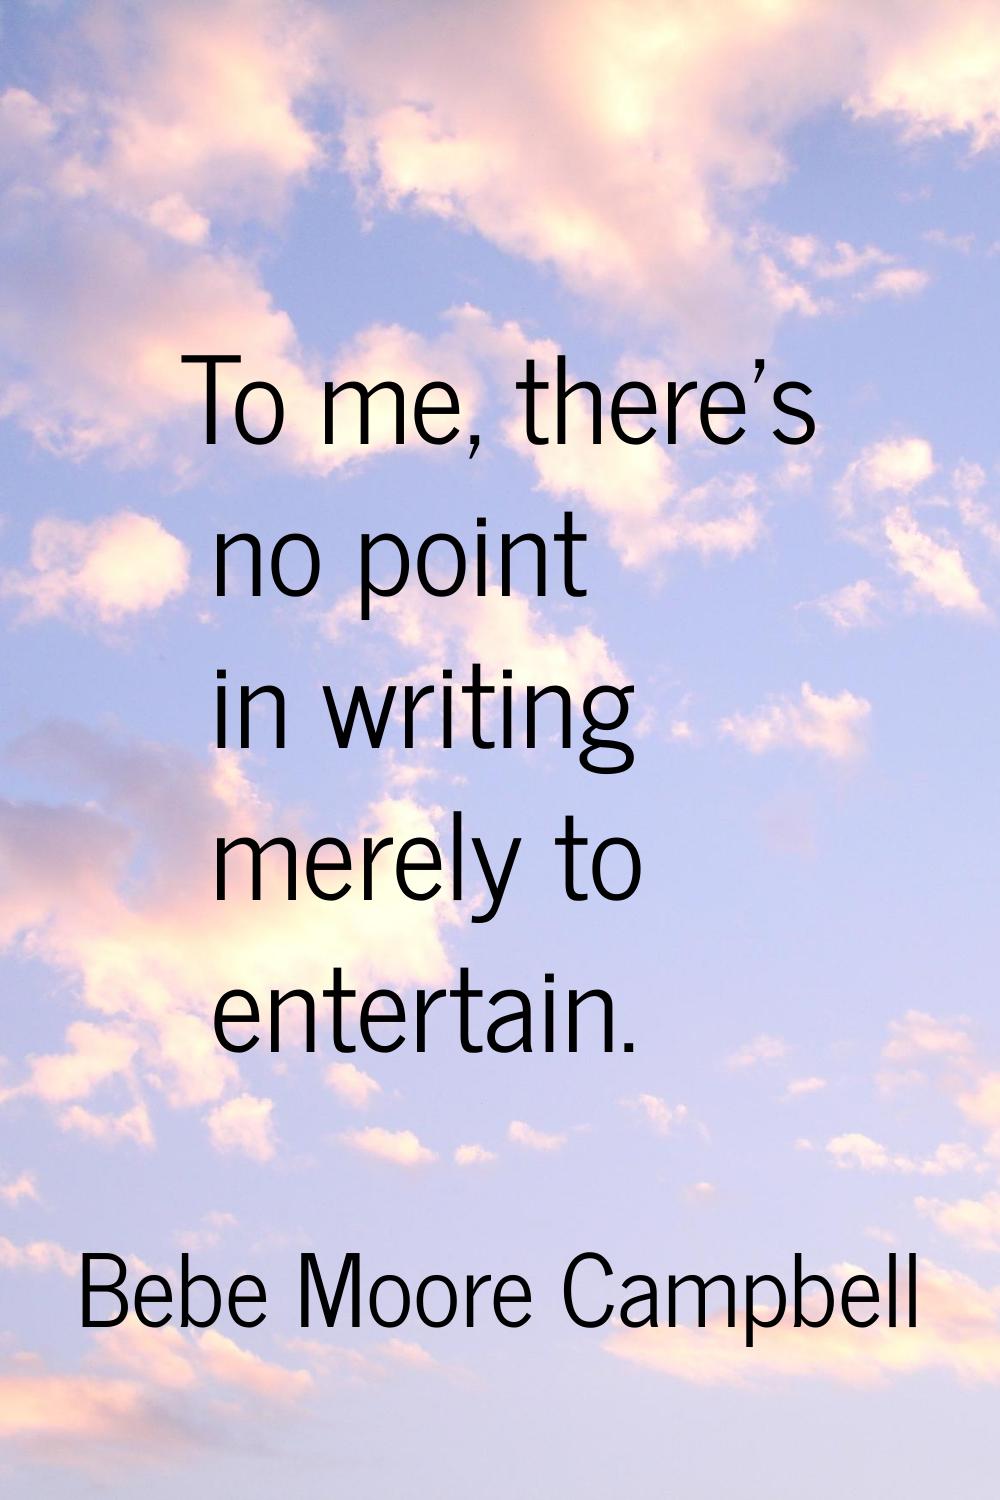 To me, there's no point in writing merely to entertain.